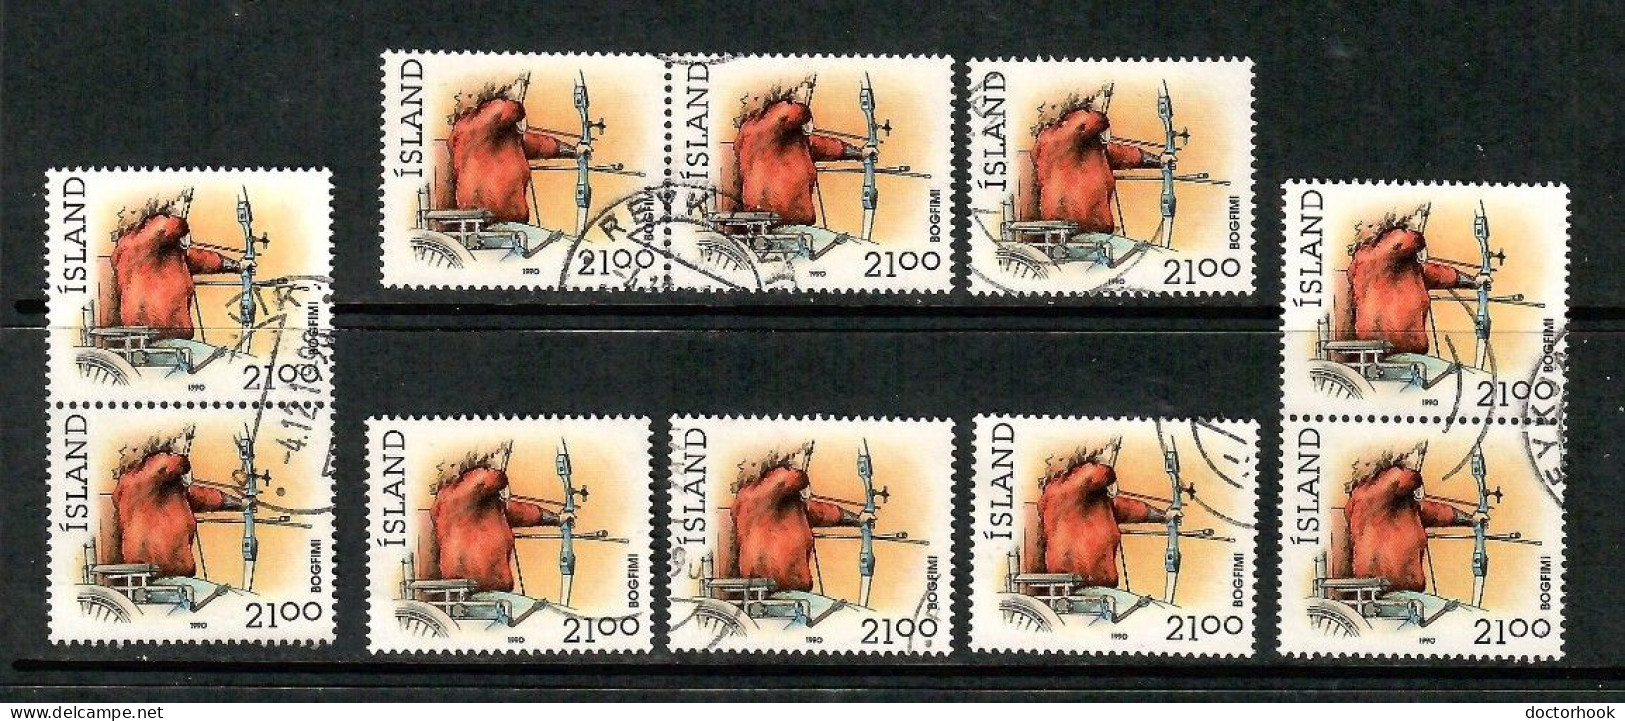 ICELAND   Scott # 700 USED WHOLESALE LOT OF 10 (CONDITION AS PER SCAN) (WH-623) - Colecciones & Series